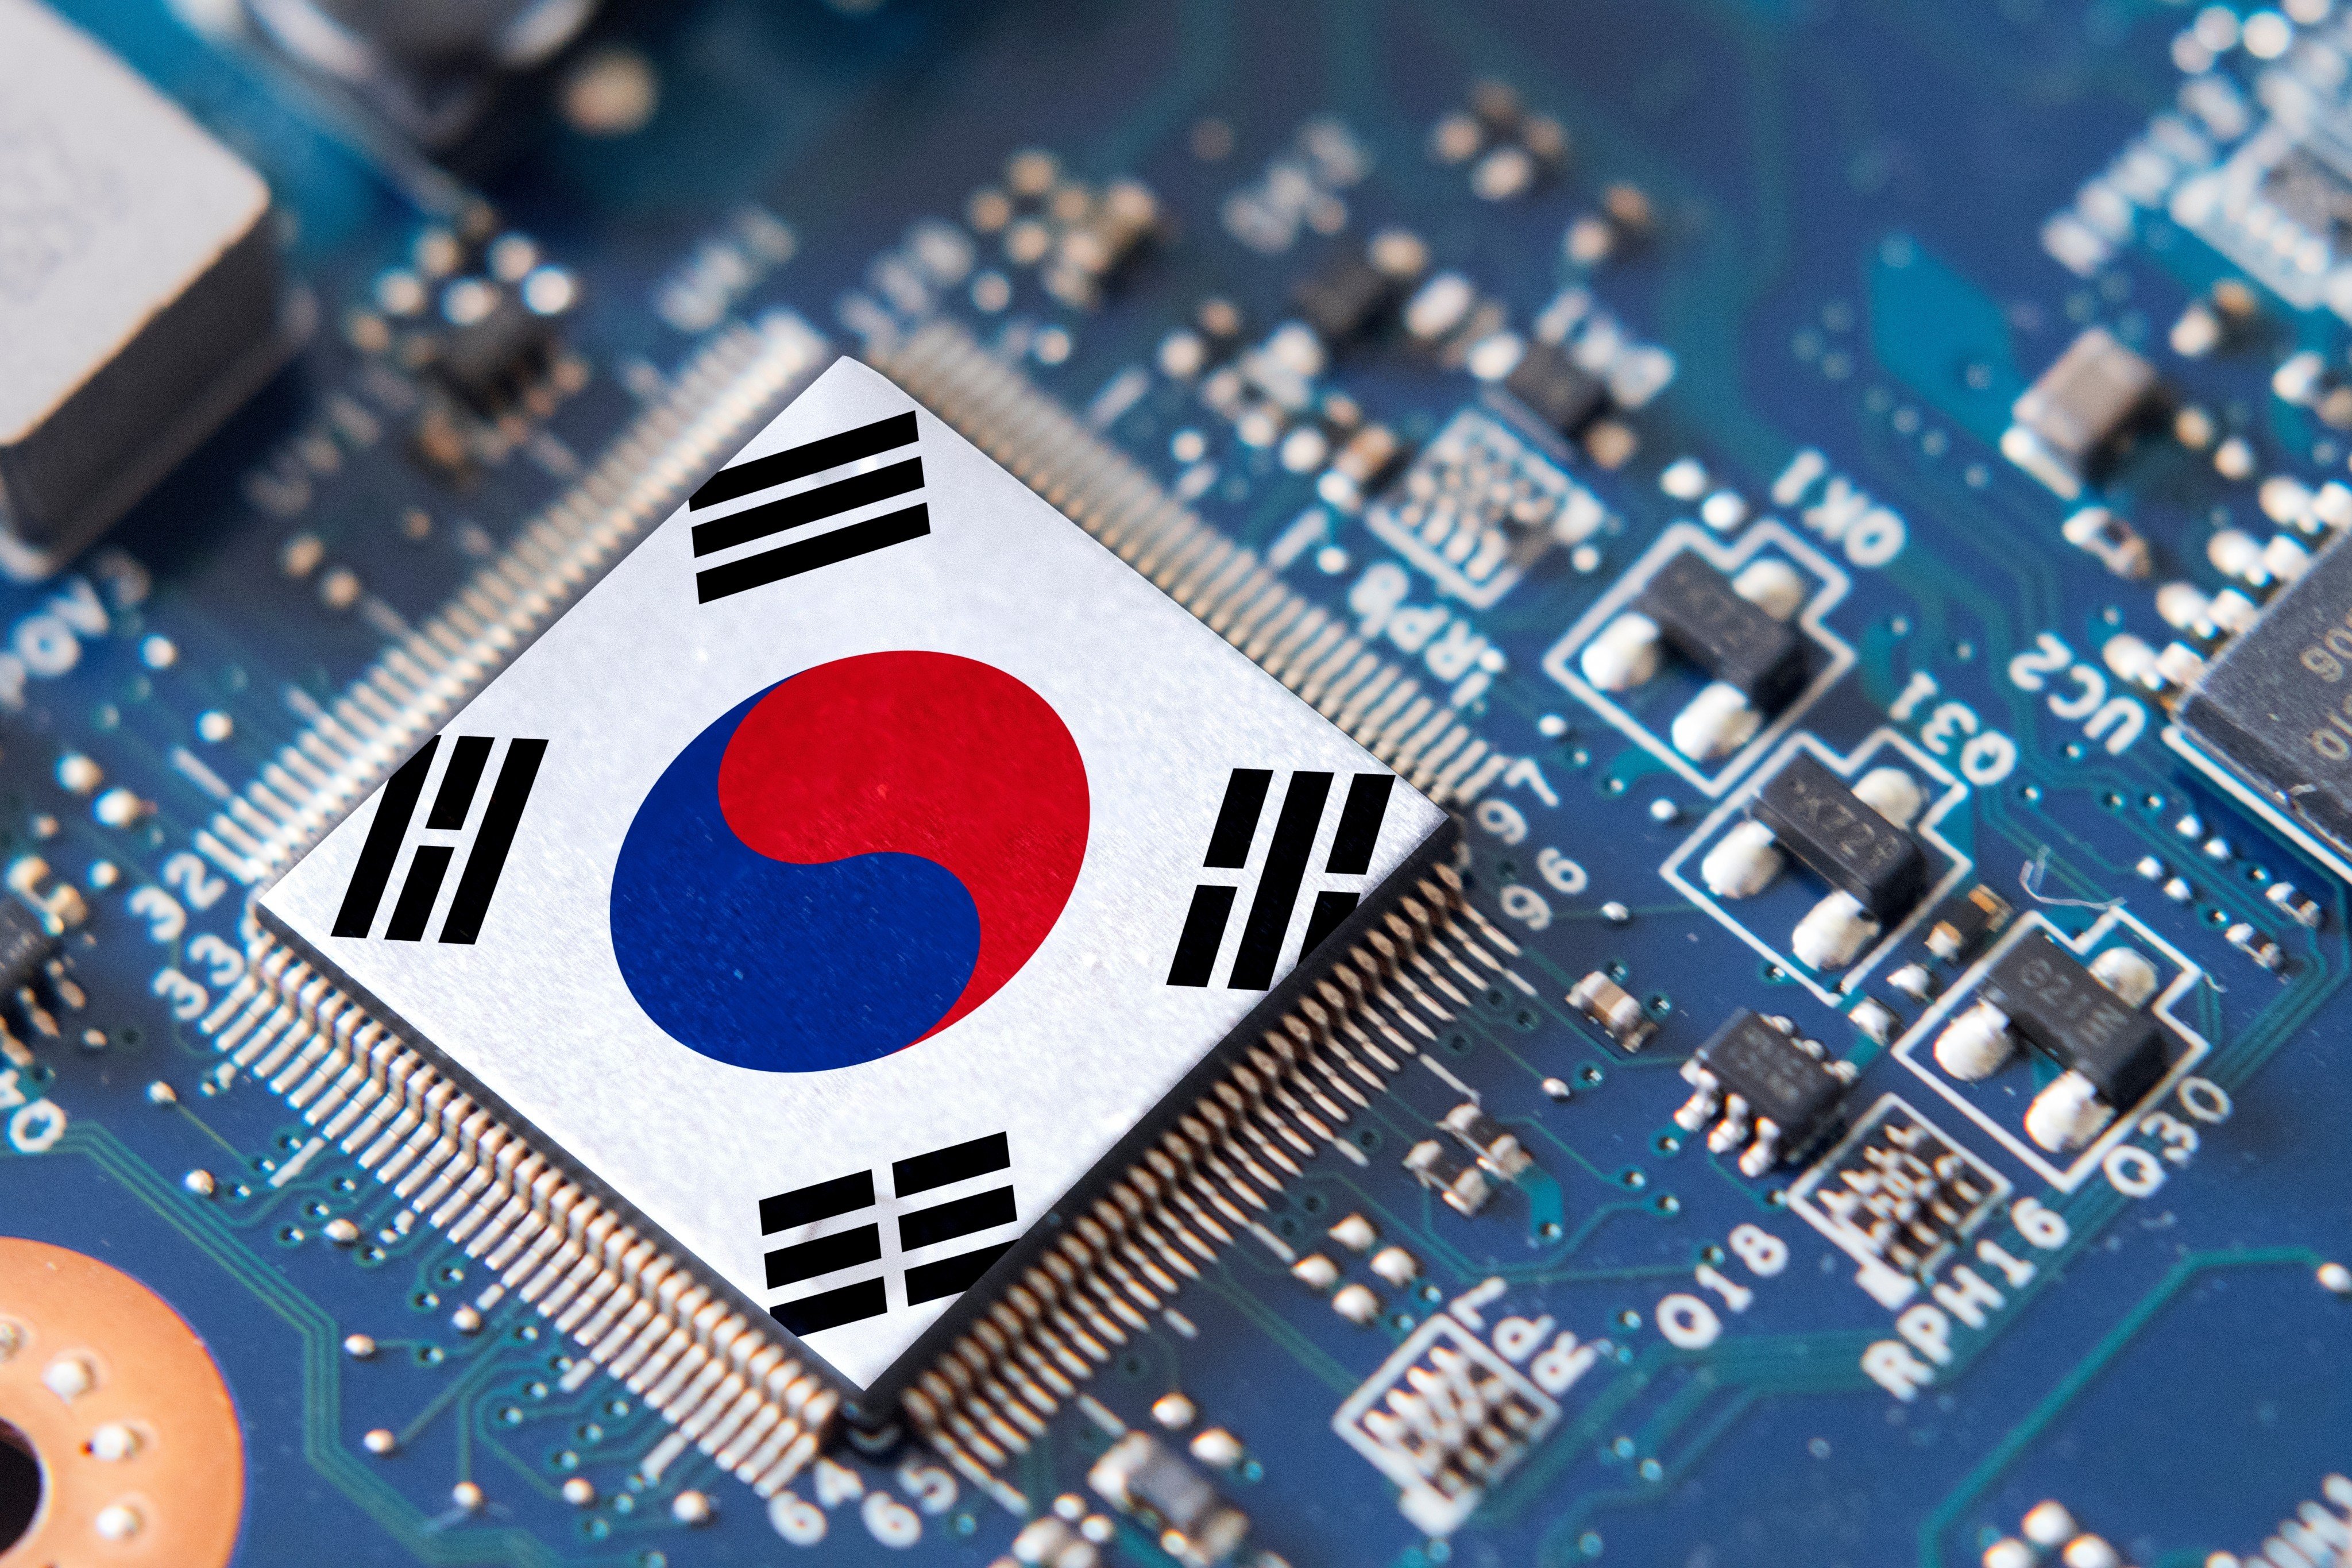 South Korea’s chip inventories in April decreased the fastest since 2014. Photo: Shutterstock